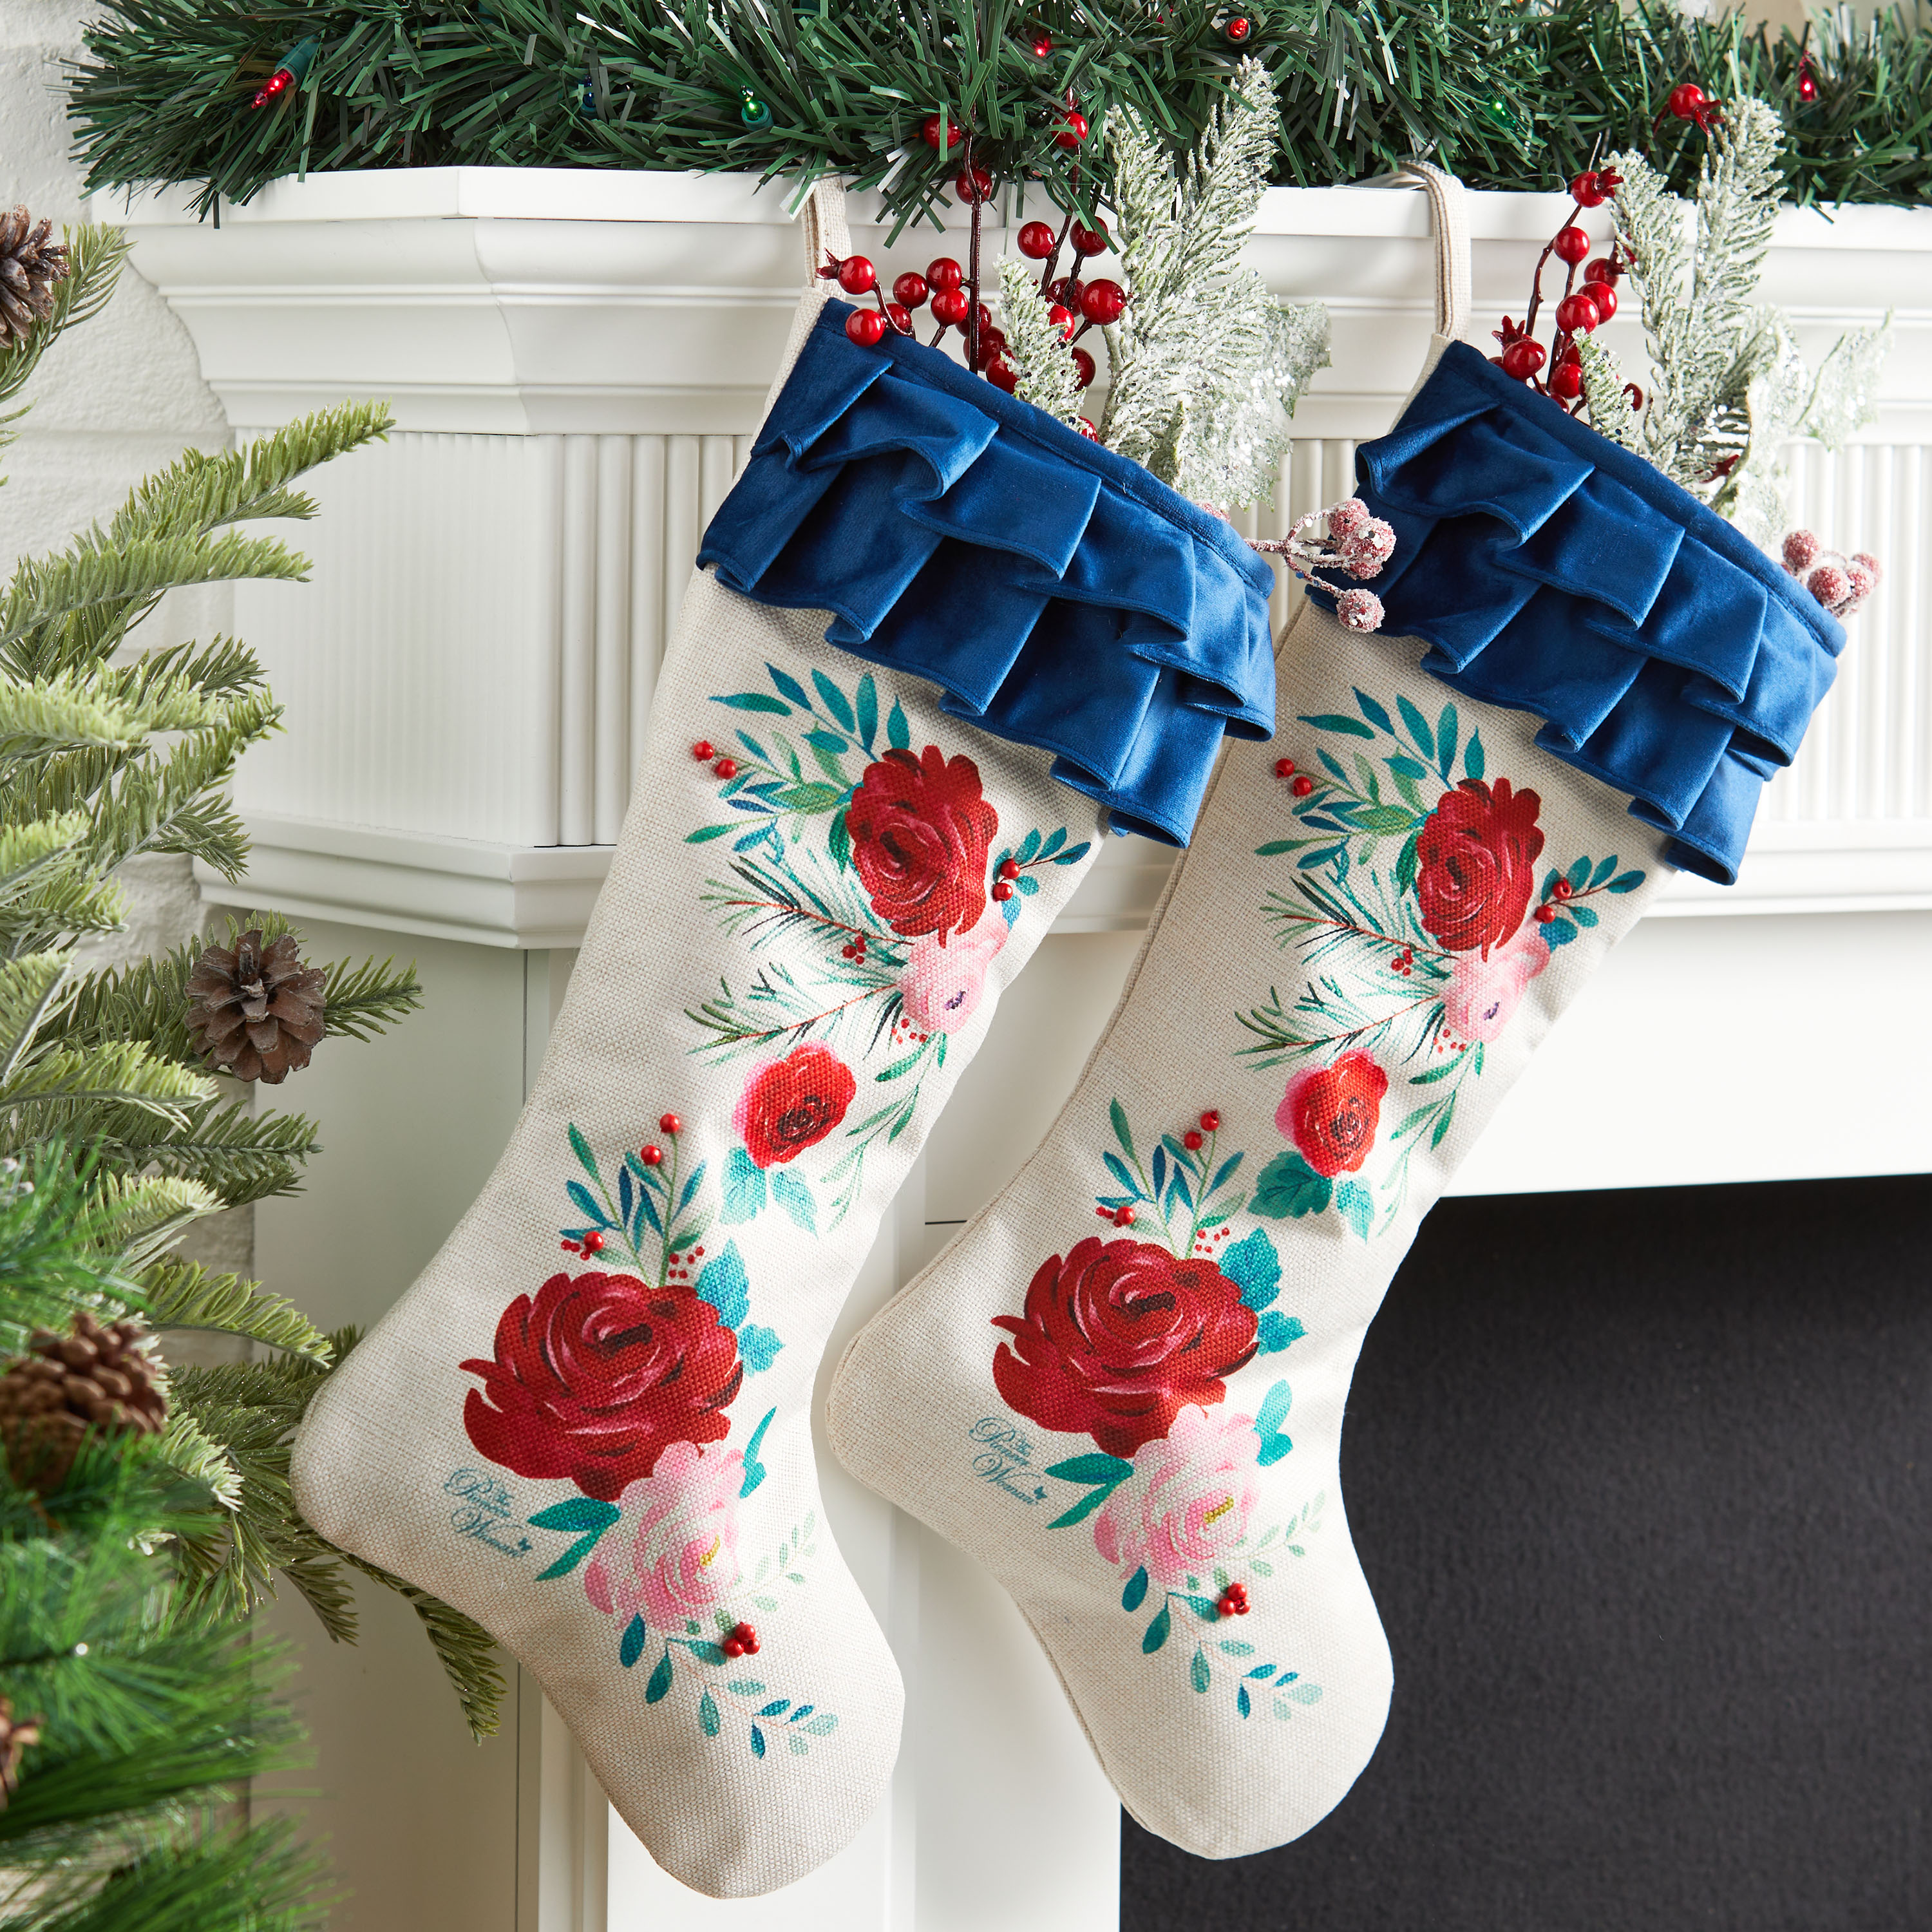 The Pioneer Woman Set of 2 Red Roses Ruffle Christmas Stockings, 20" - image 2 of 9